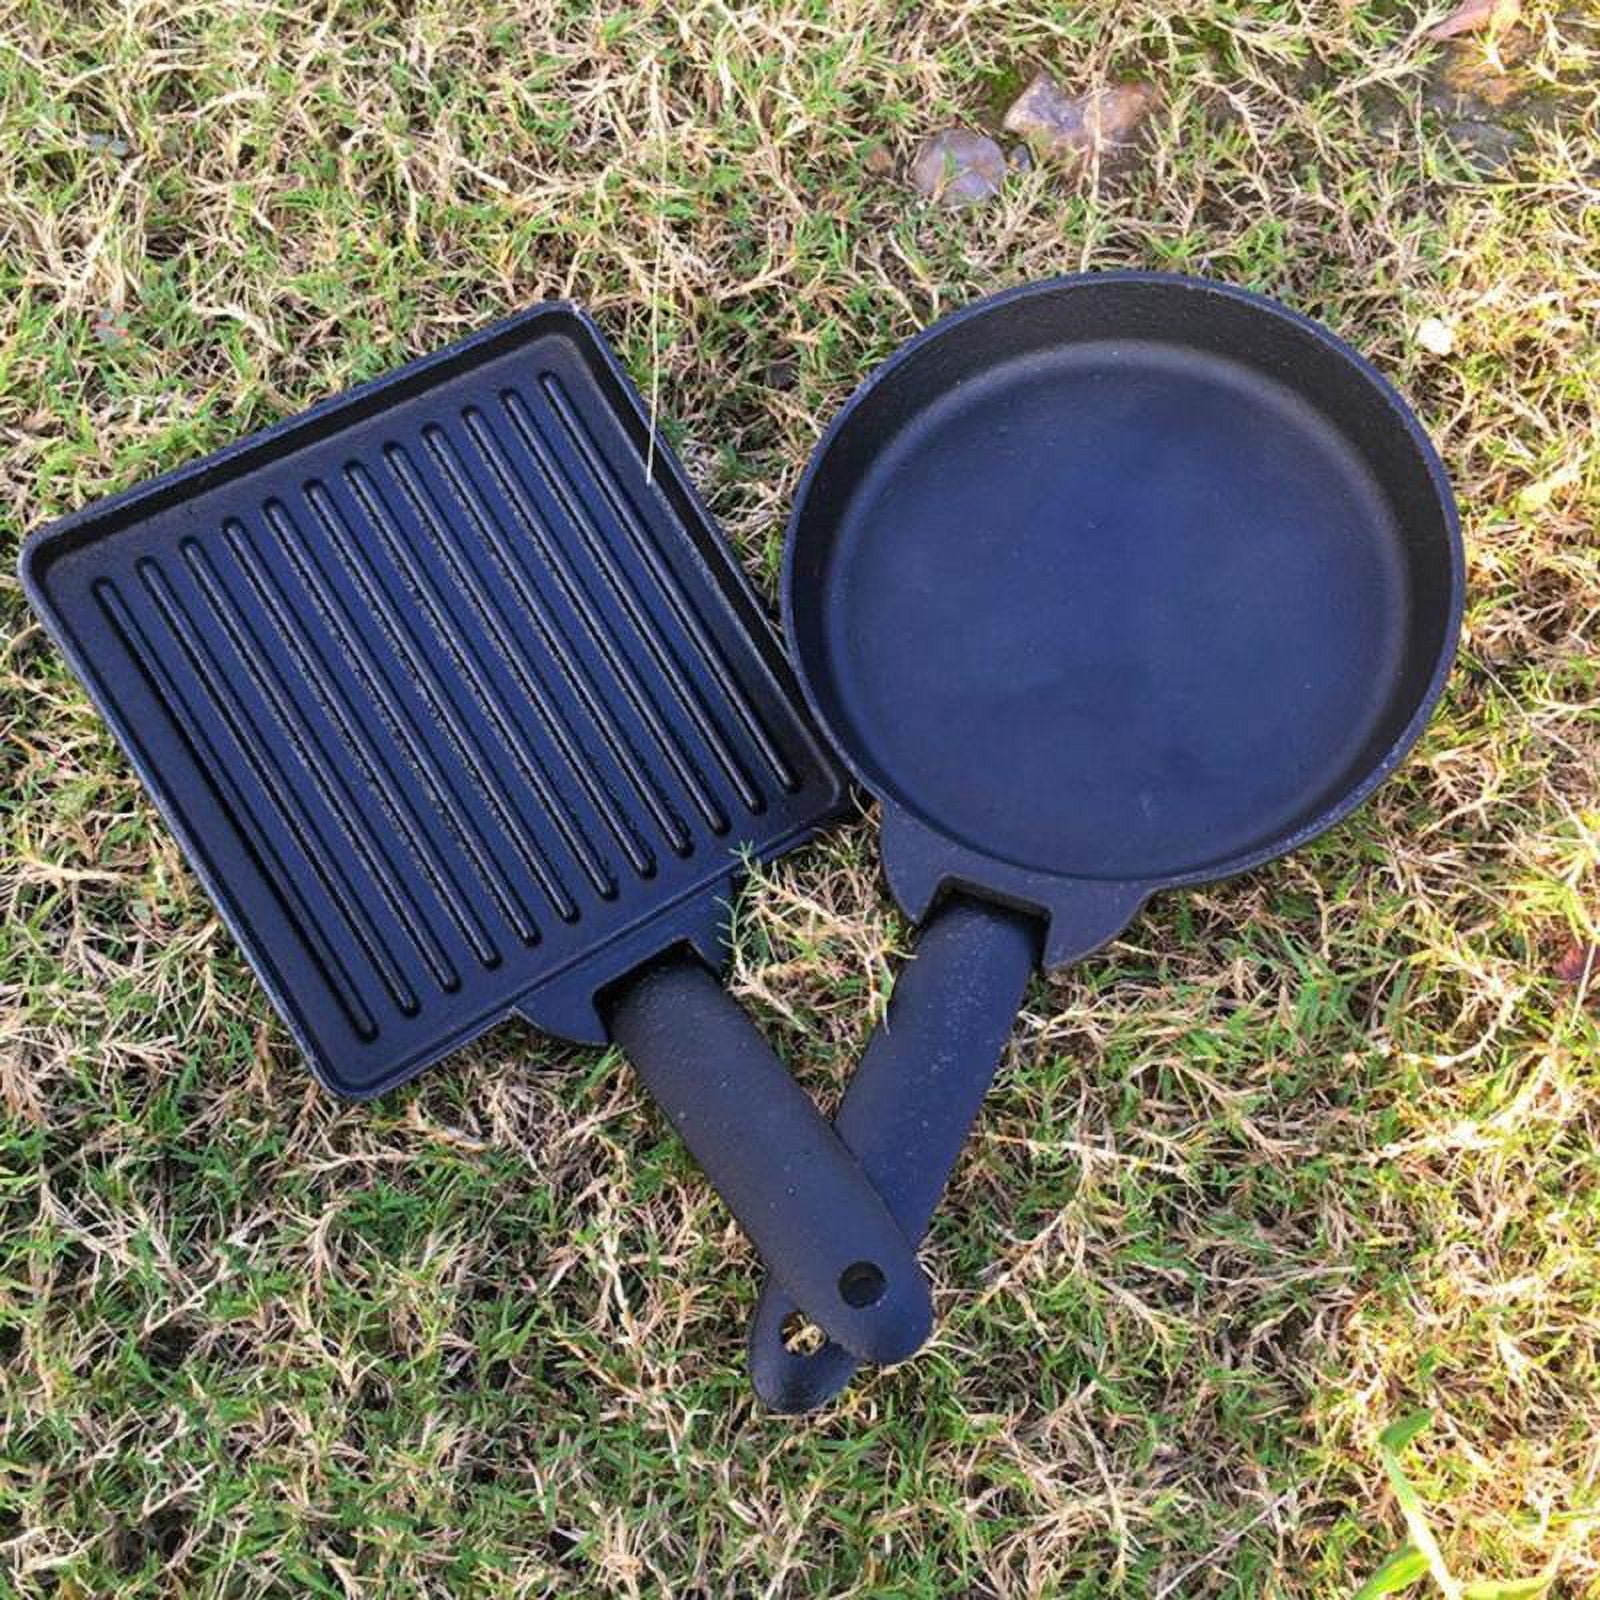 Bestargot  Camping Cast Iron Skillet 11 inch, 2-3 People Use, for Sauté,  Sear, Fry, Bake and Stir Fry –